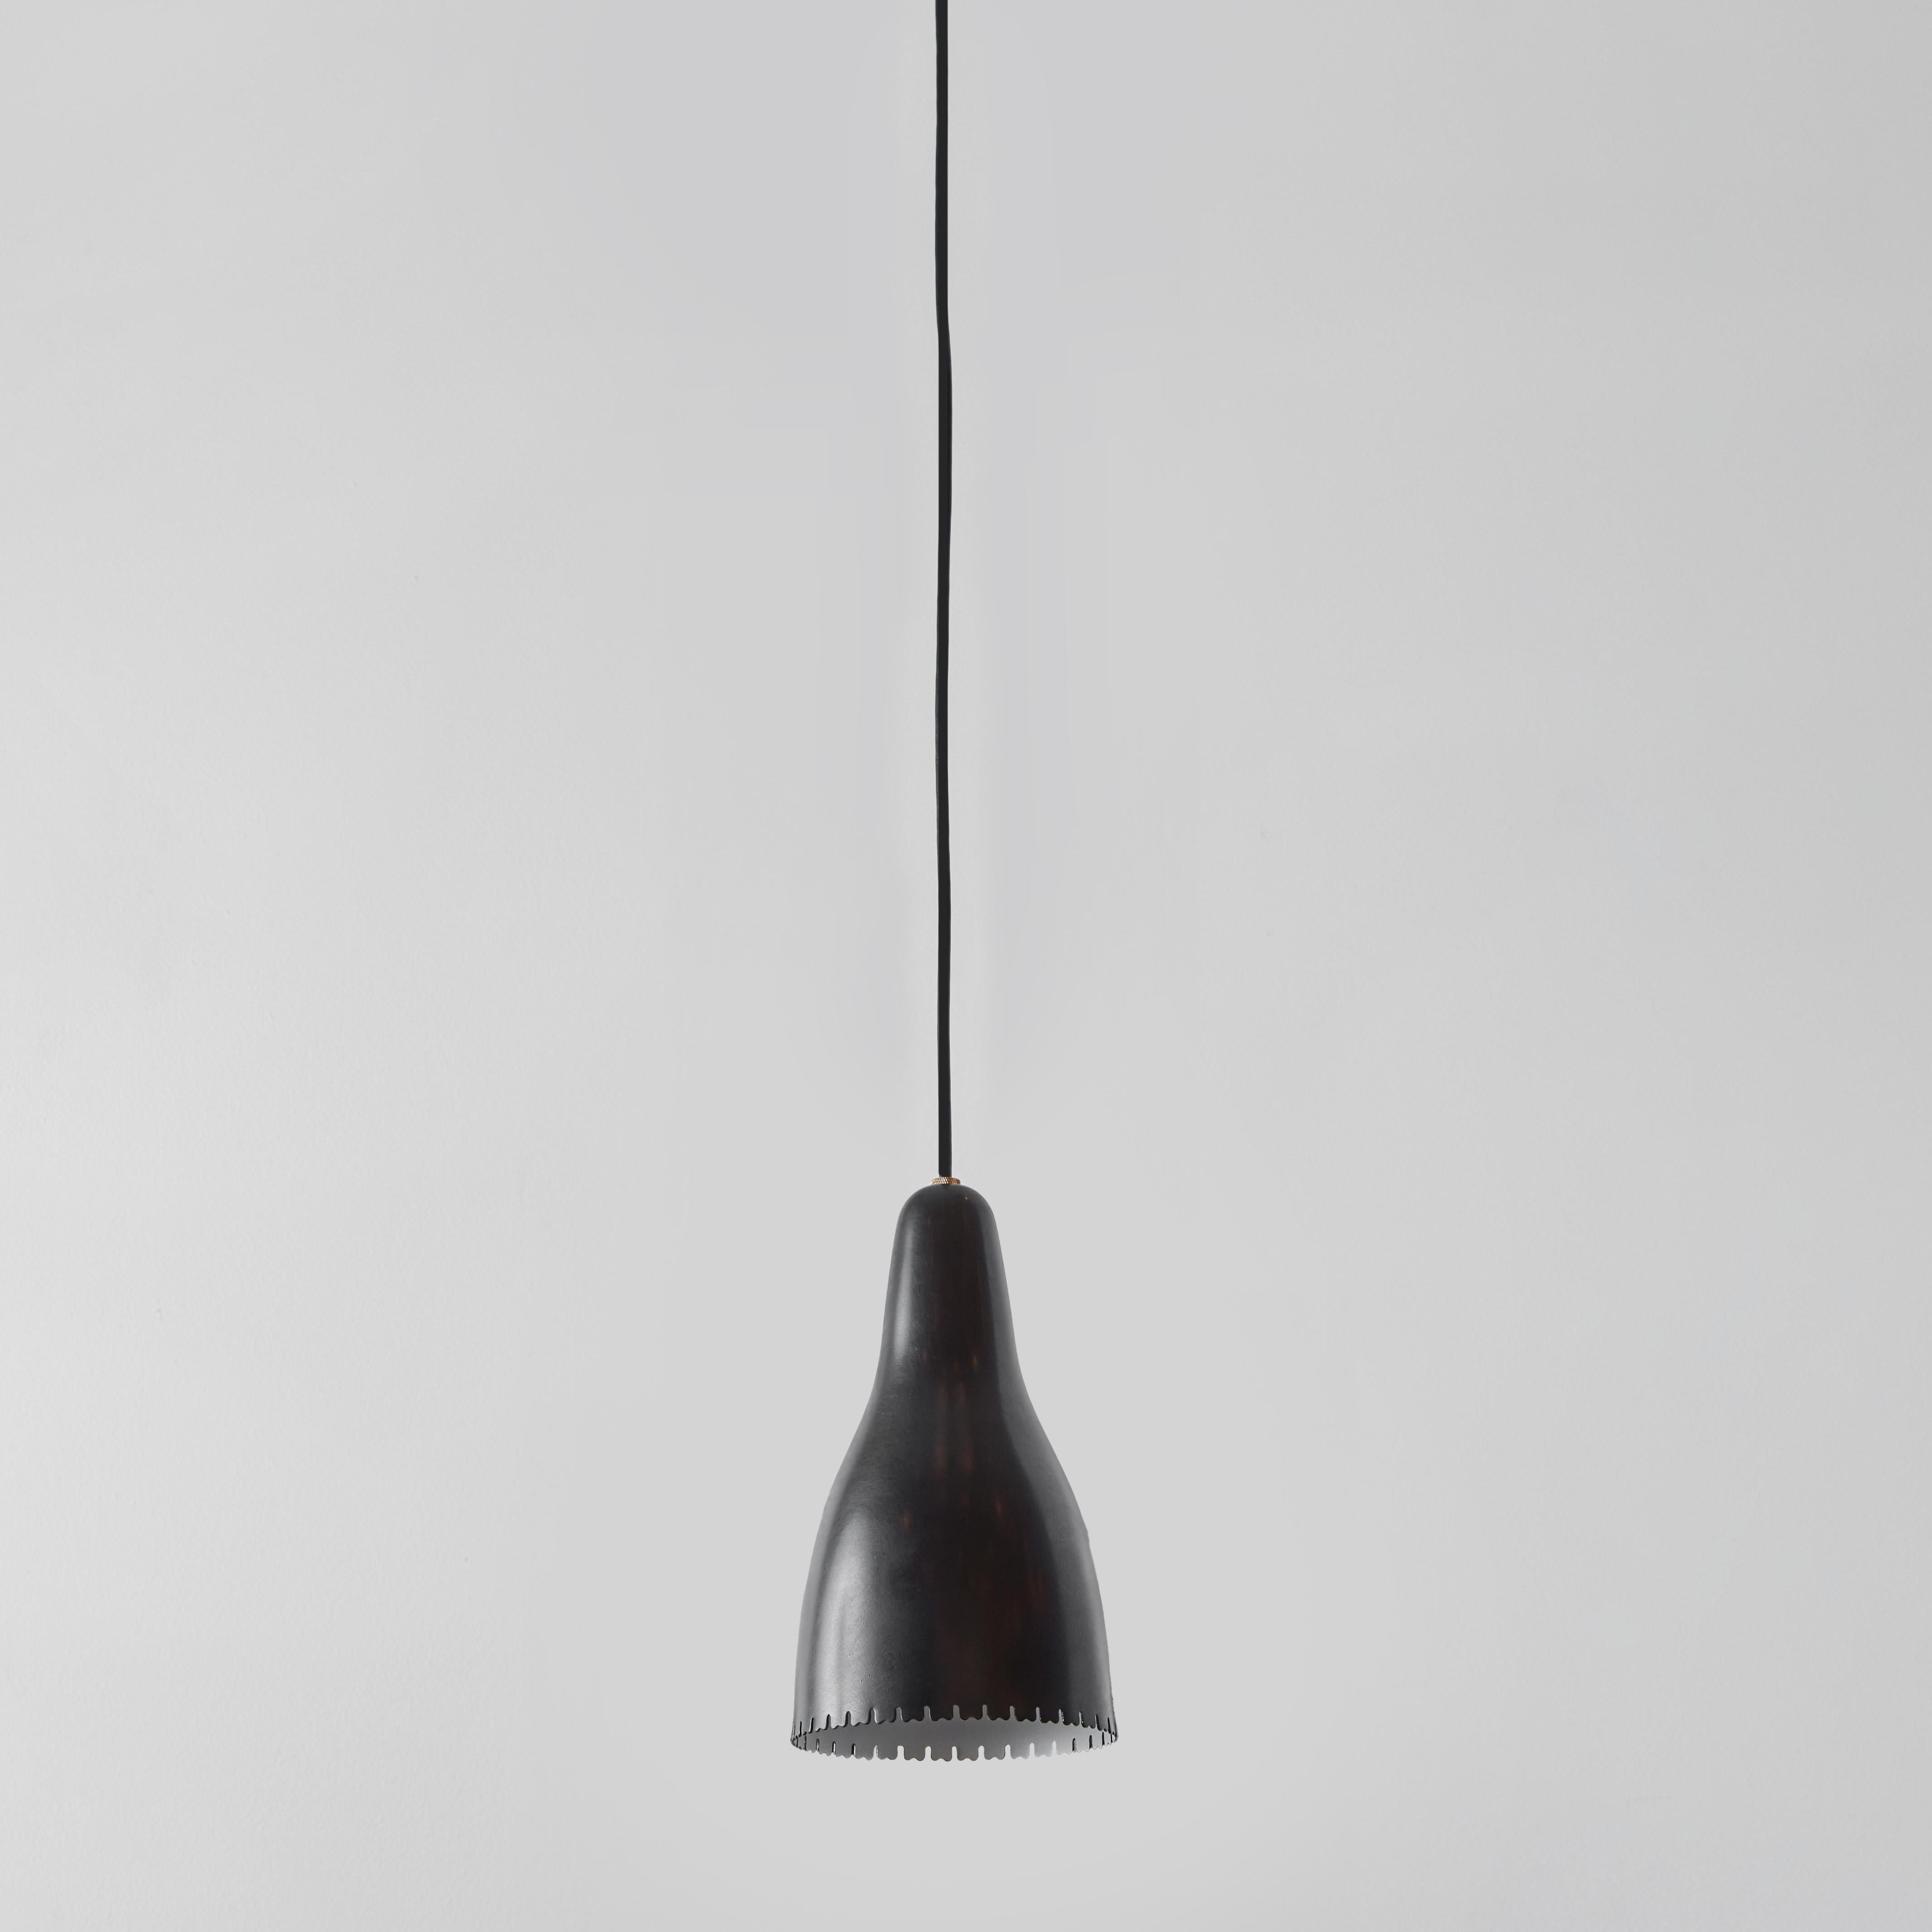 1950s Bent Karlby Black Painted Metal & Brass Pendant Lamp for Lyfa. Executed in architecturally cut and elegantly shaped black painted metal shades with brass hardware, Denmark, circa 1950s. A quintessentially Danish Modern pendant by a master